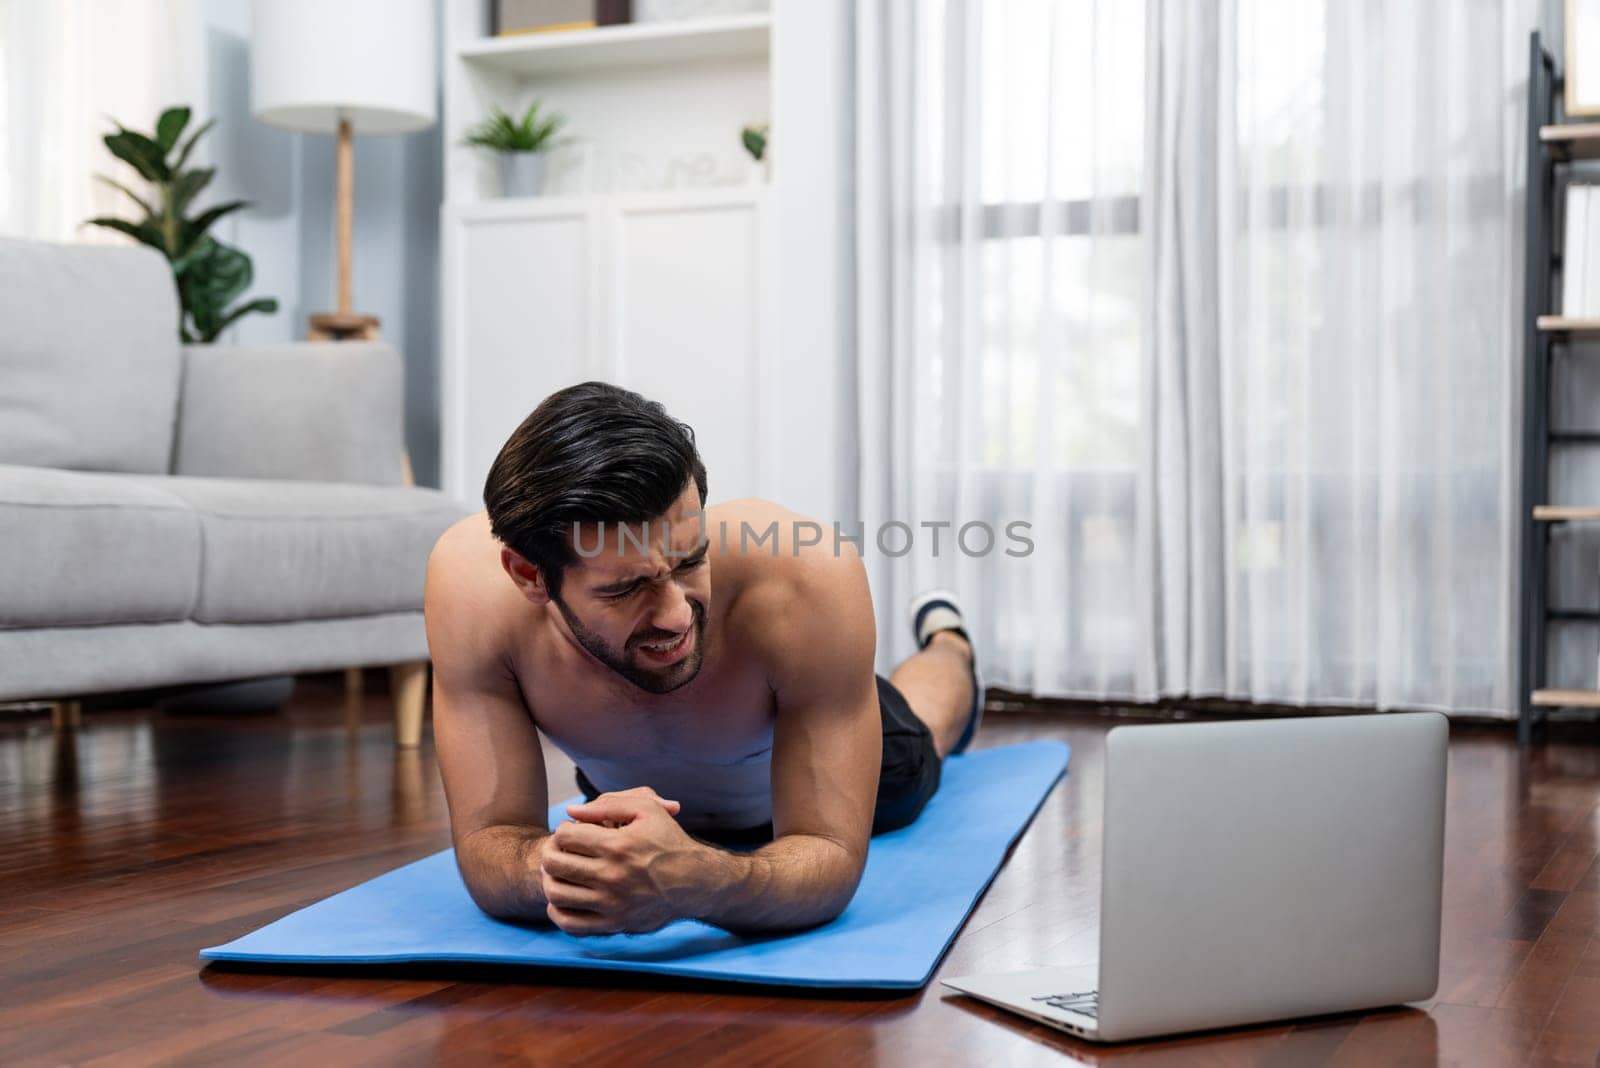 Athletic and sporty man suffer from exercise injury during online body workout exercise session at home. Painful ache from injured muscle accident during gaiety home exercise workout training concept.